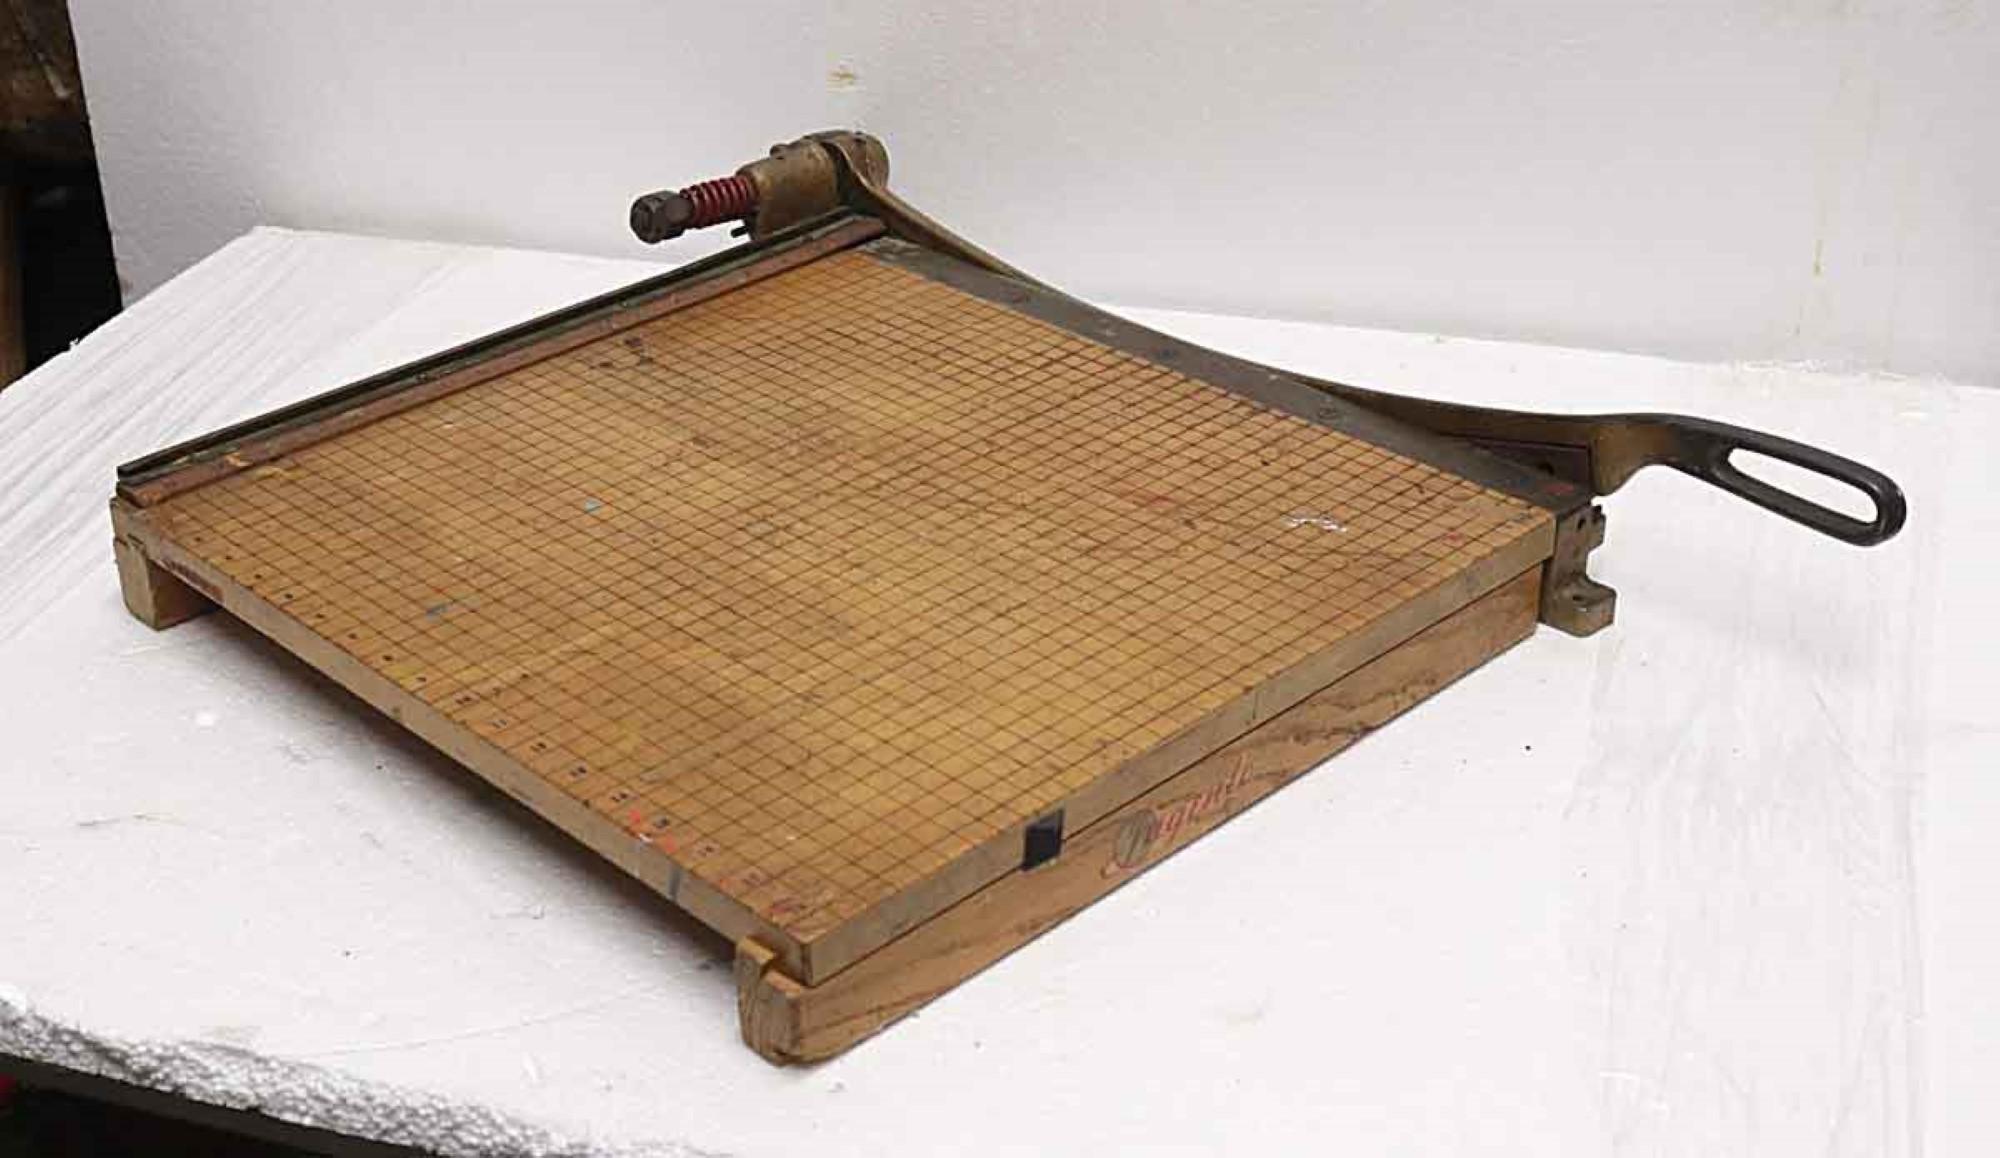 Industrial 1920s High School Art Class Wood & Steel Paper Cutter with Built-In Ruler Guides